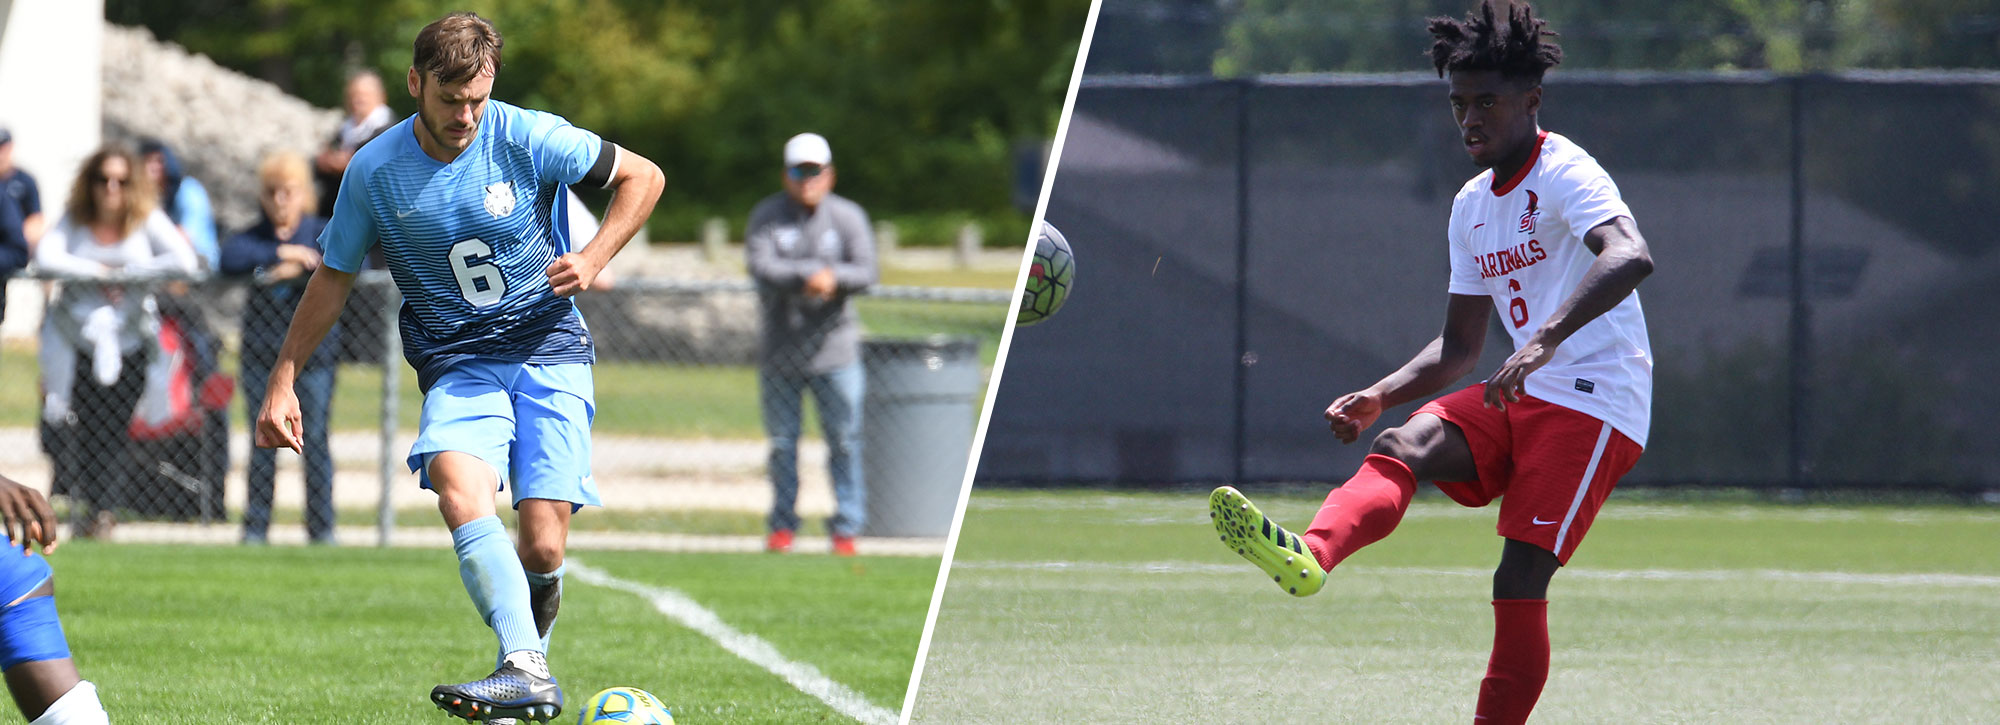 Northwood's Vaughn, Saginaw Valley's Sinclair Tabbed GLIAC Soccer Players of the Week